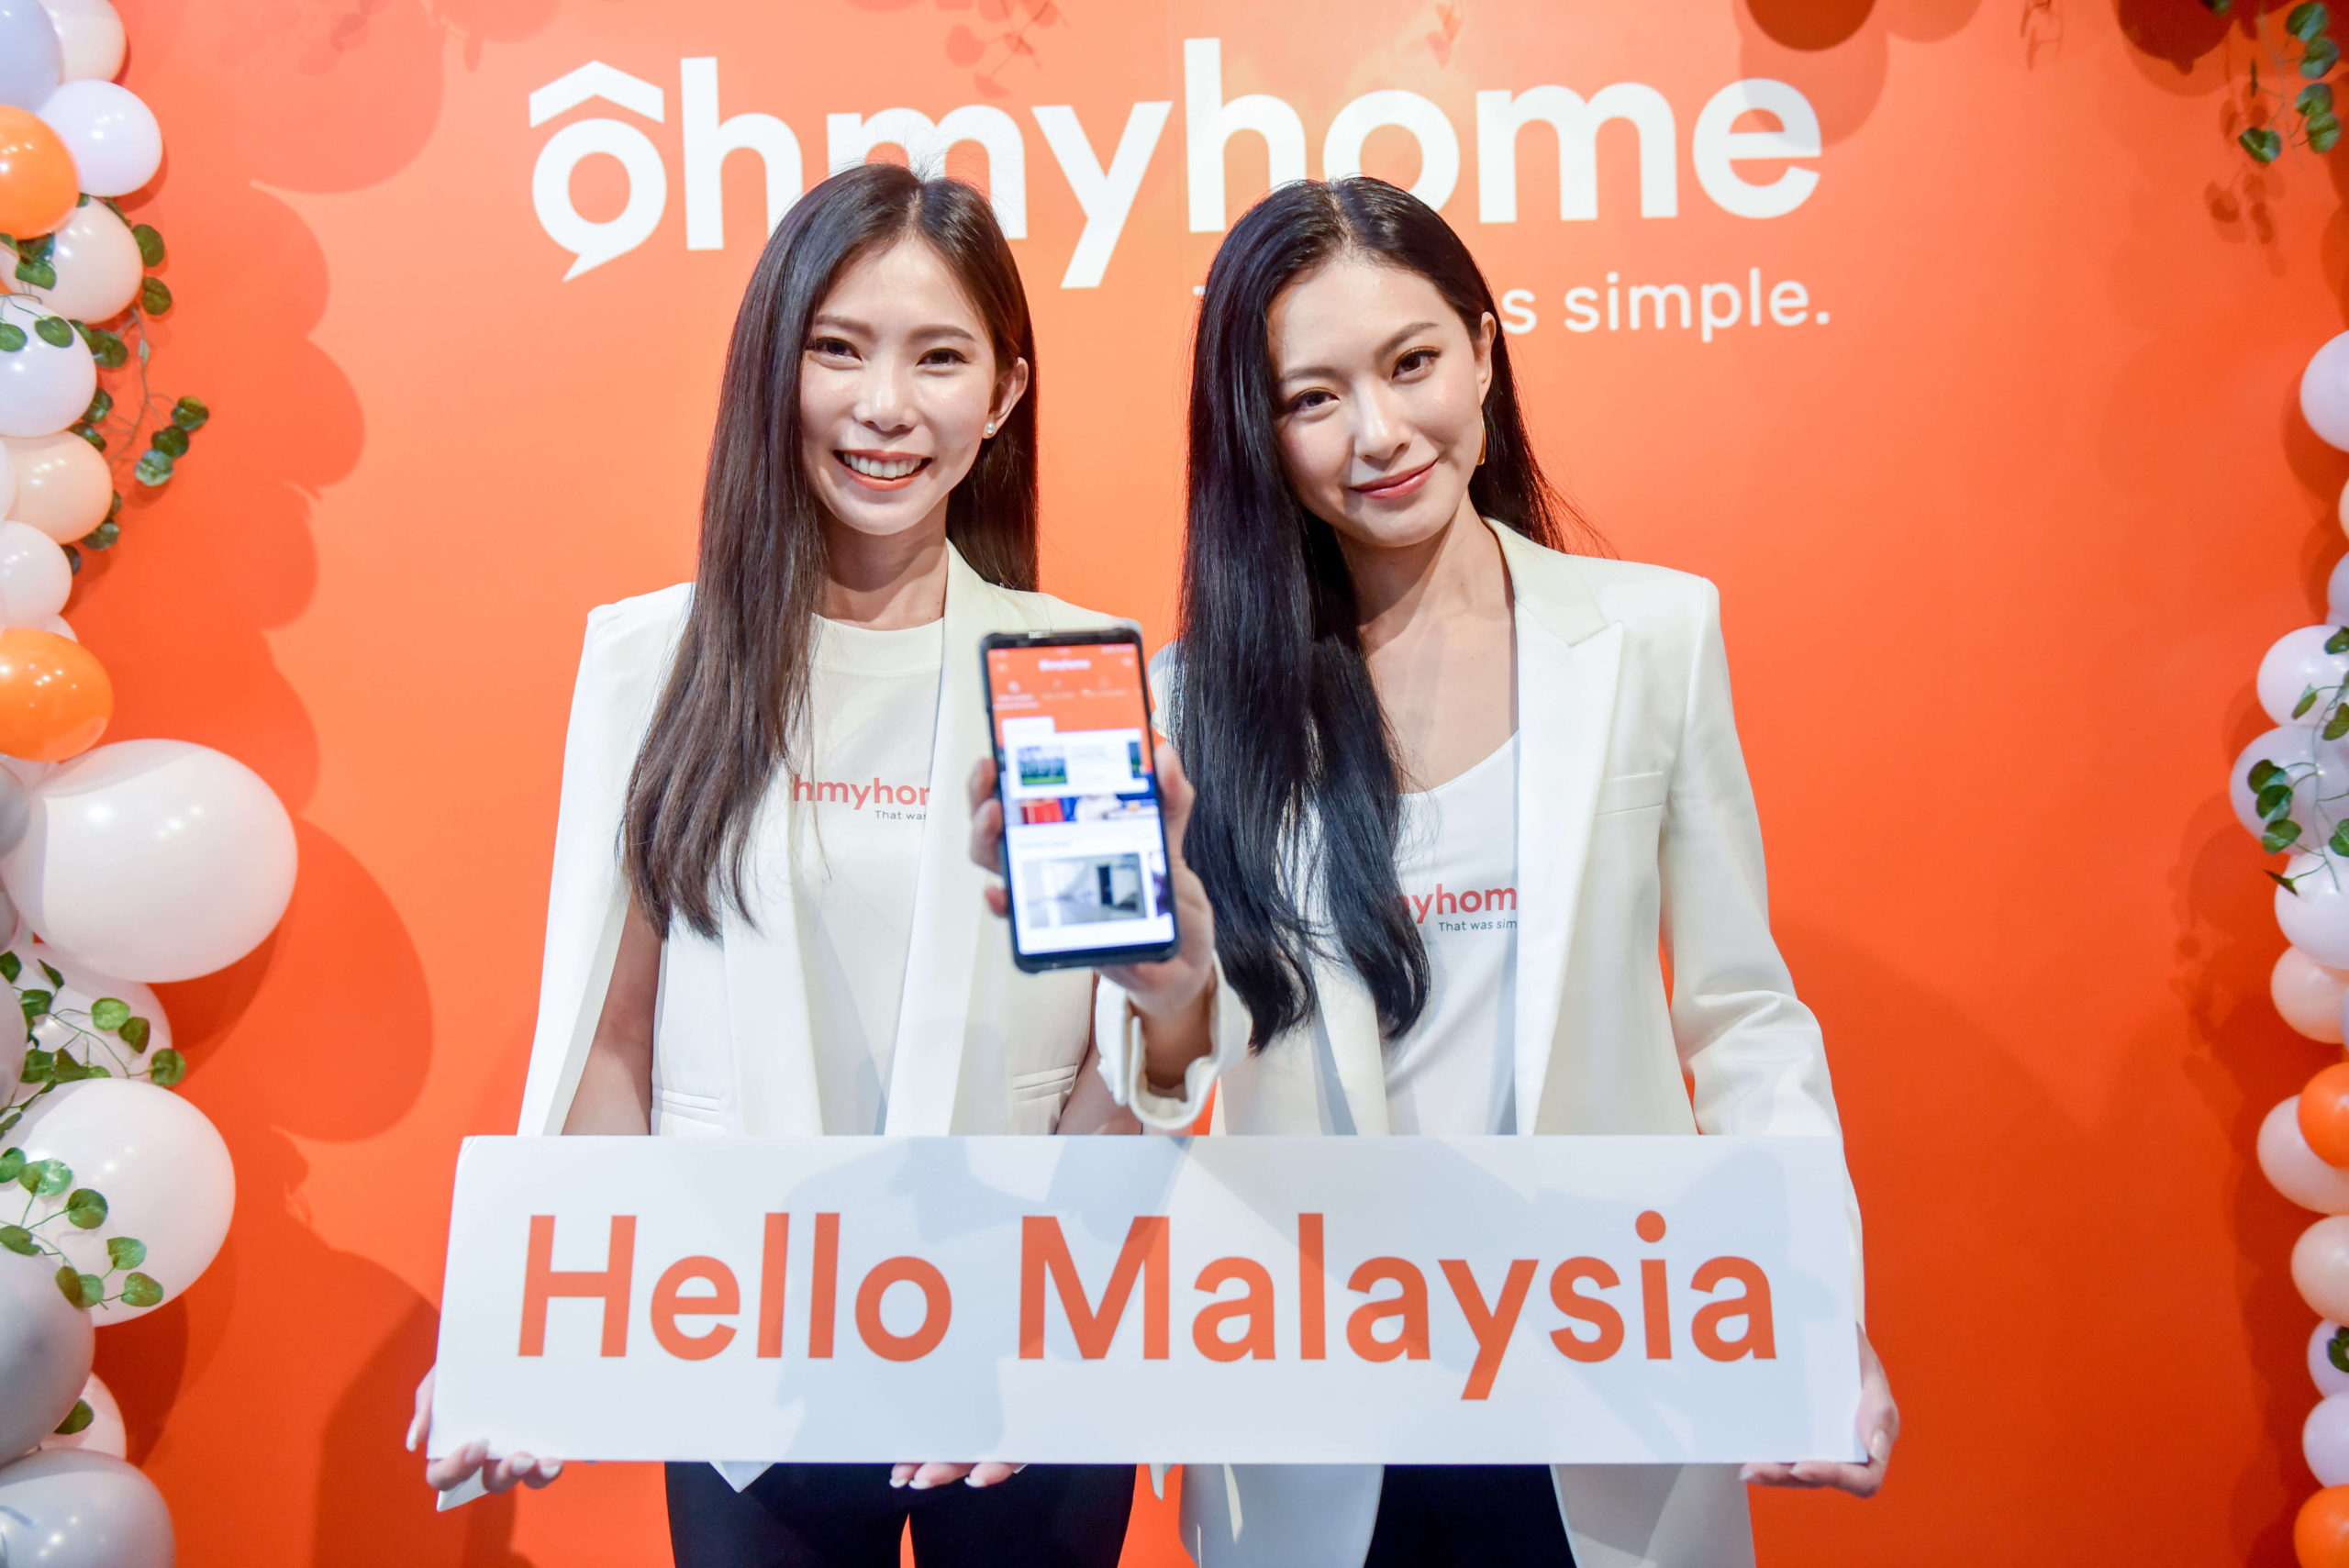 ohmyhome-buy-sell-rent-property-app-singapore-malaysia-launch